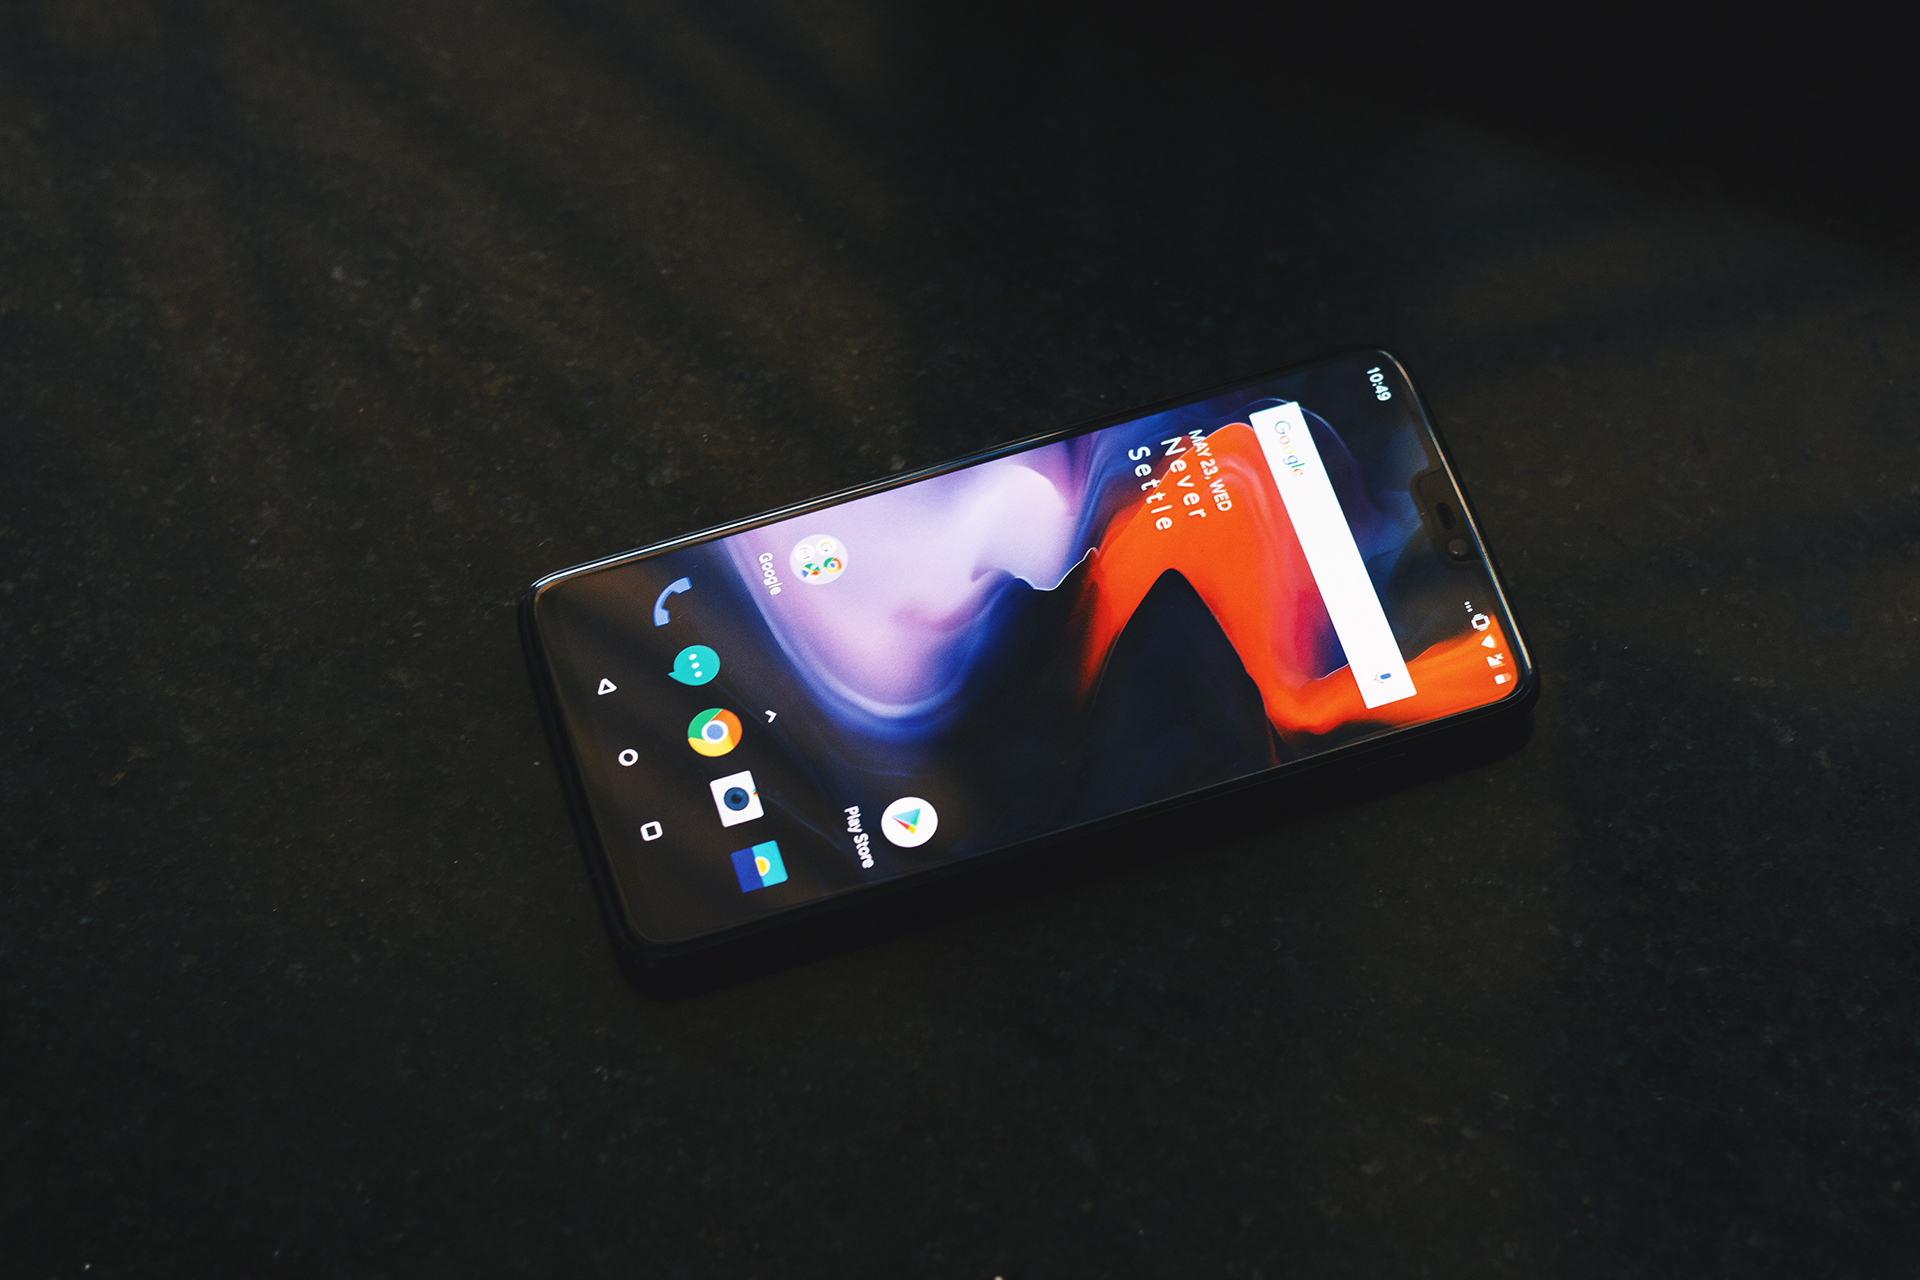 Oneplus 6 Review Design Truetech 6 – Oneplus 6 Review – The Nearly Quintessential Phone That Oneplus Made | Truetech